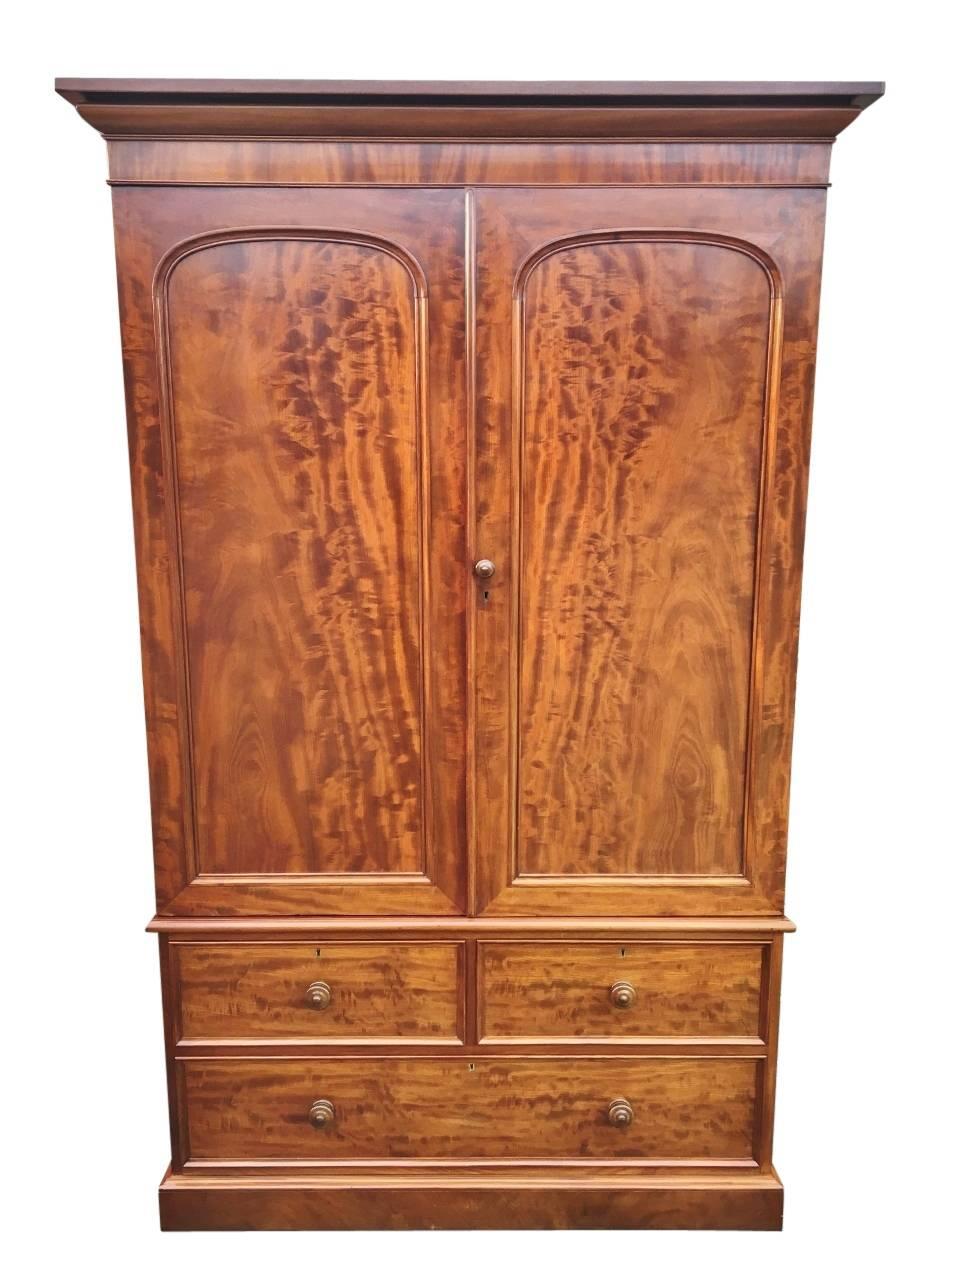 Fine quality two door mahogany compactum wardrobe superbly fitted out. 

This delightful antique wardrobe is extremely useful and has been well maintained. There are three deep and smoothly running drawers in the base, constructed using the best